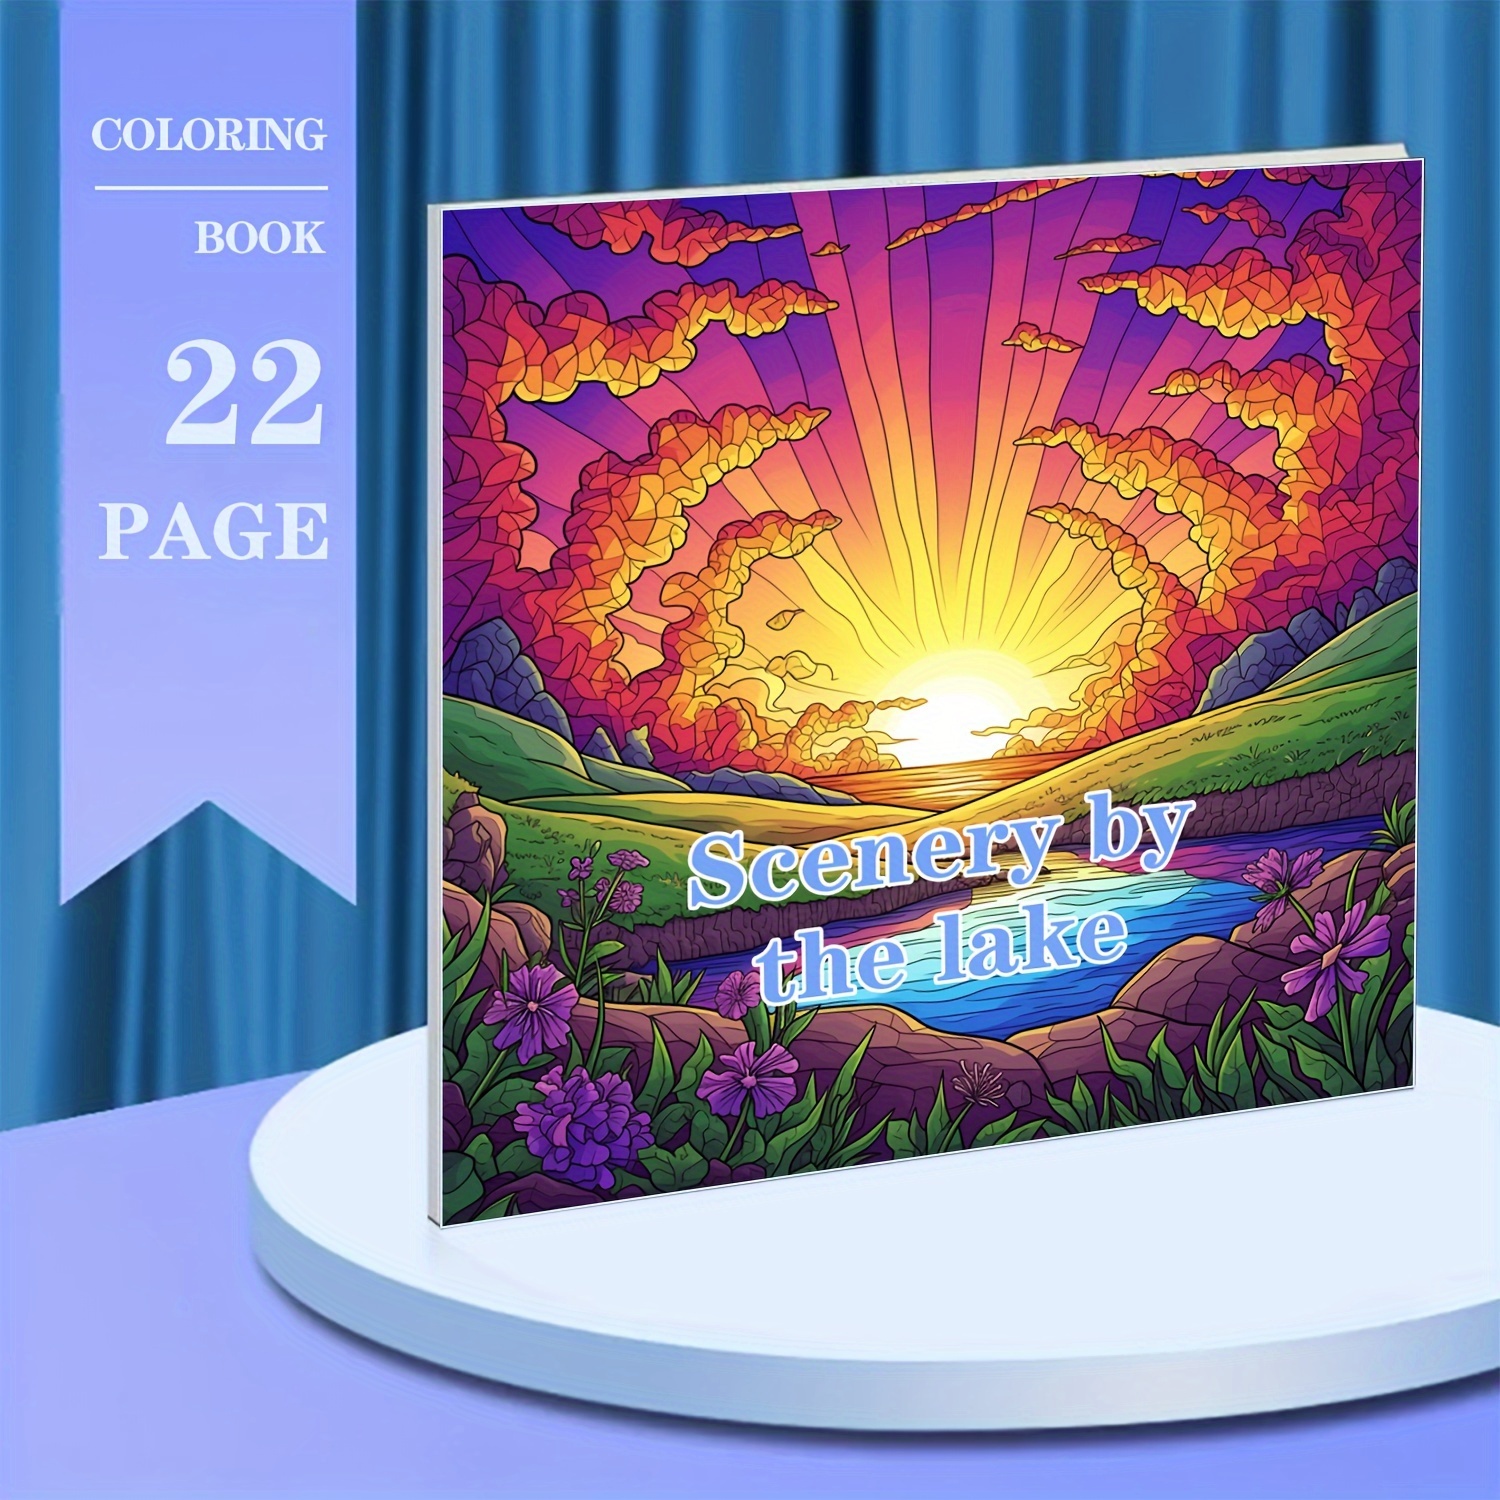 

Lakeside Scenery Coloring Book, 7.9x7.9 Inches, Paperback - Art Supplies For Ages 18+